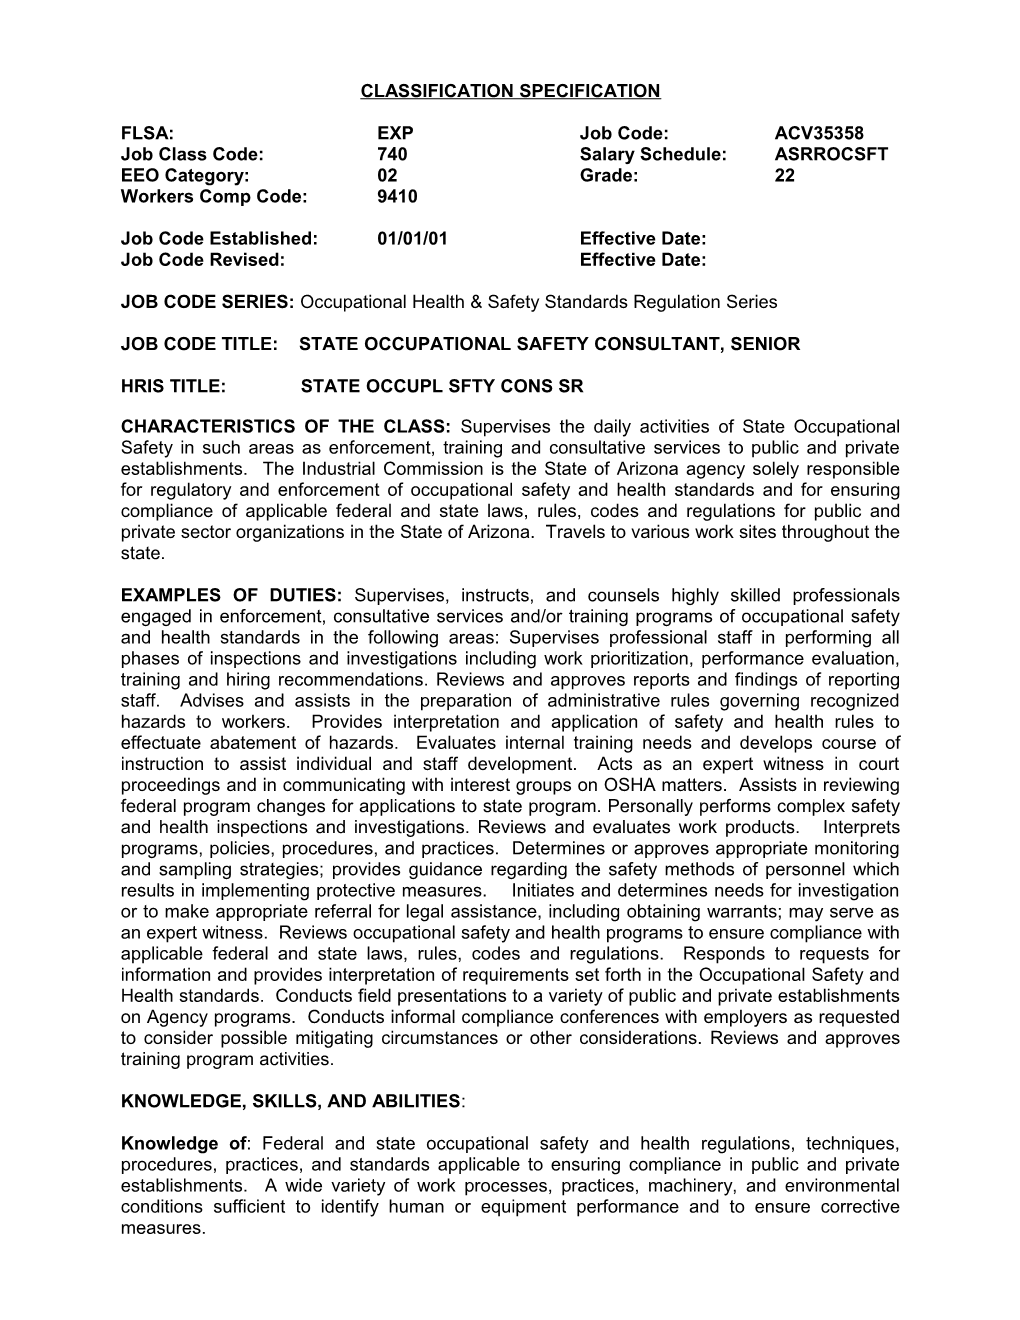 State Occupational Safety Consultant, Senior Job Code ACV35358